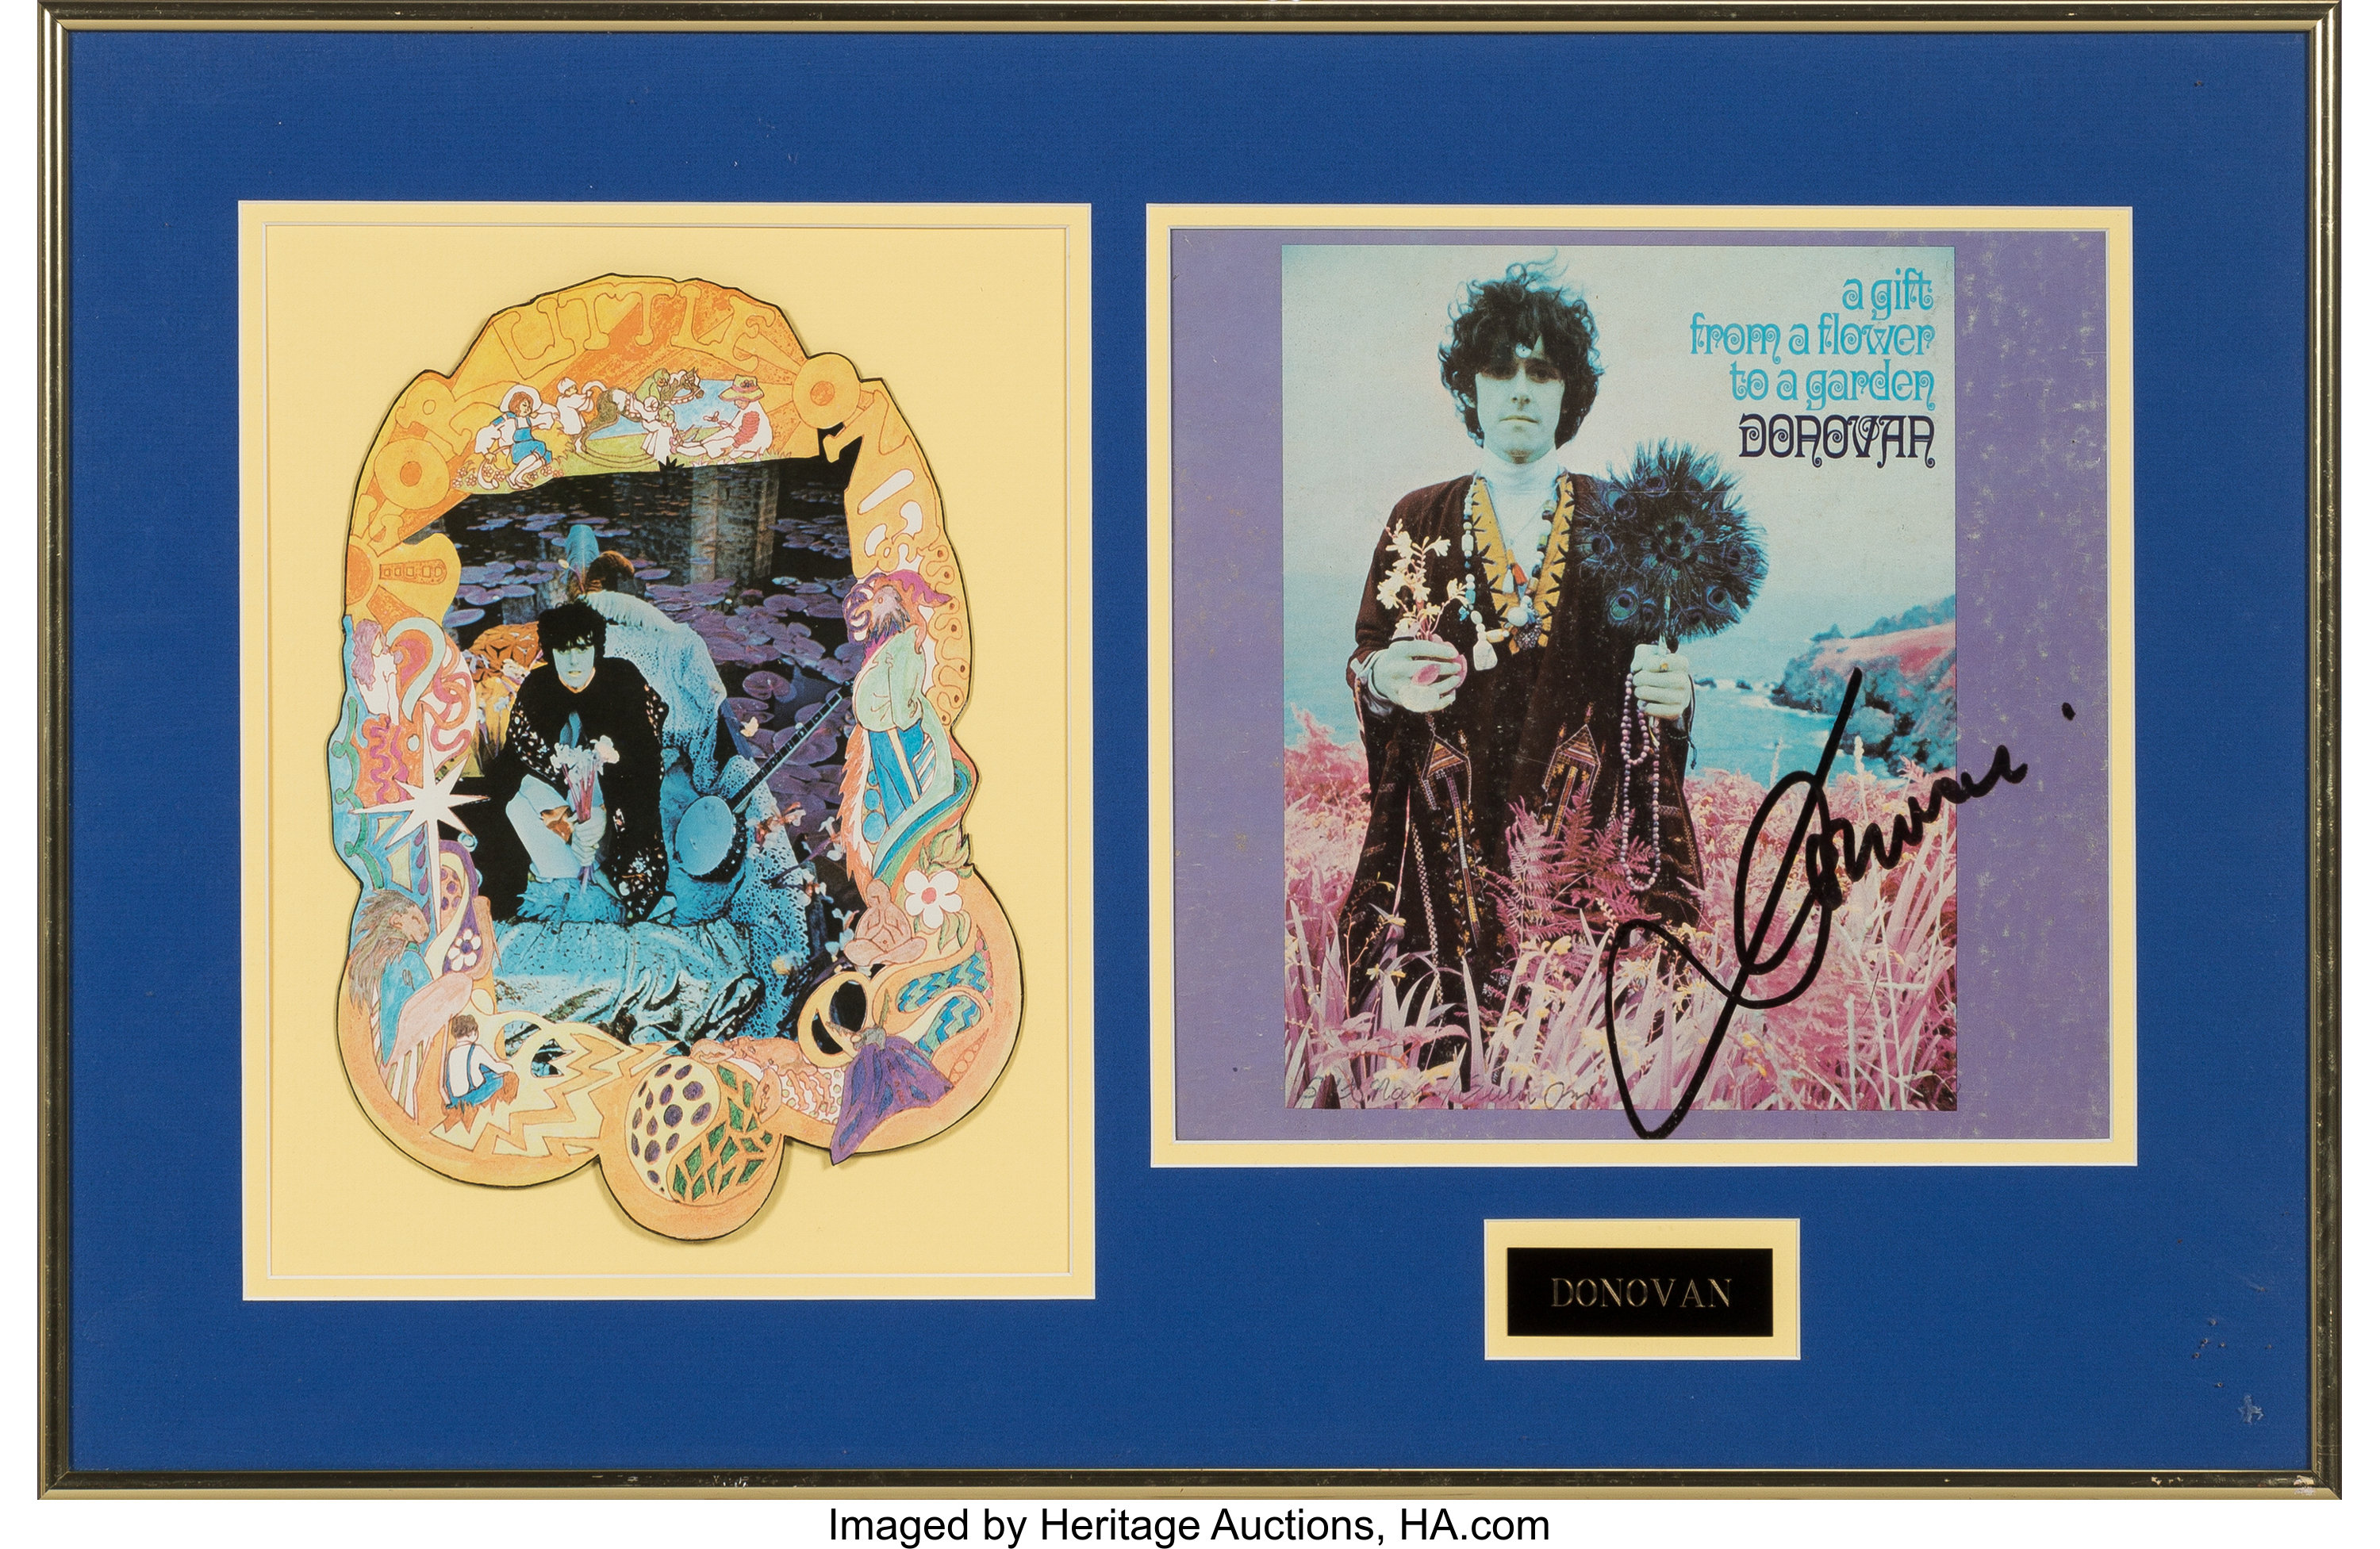 Donovan Signed A Gift From A Flower To A Garden Lp Cover In Framed